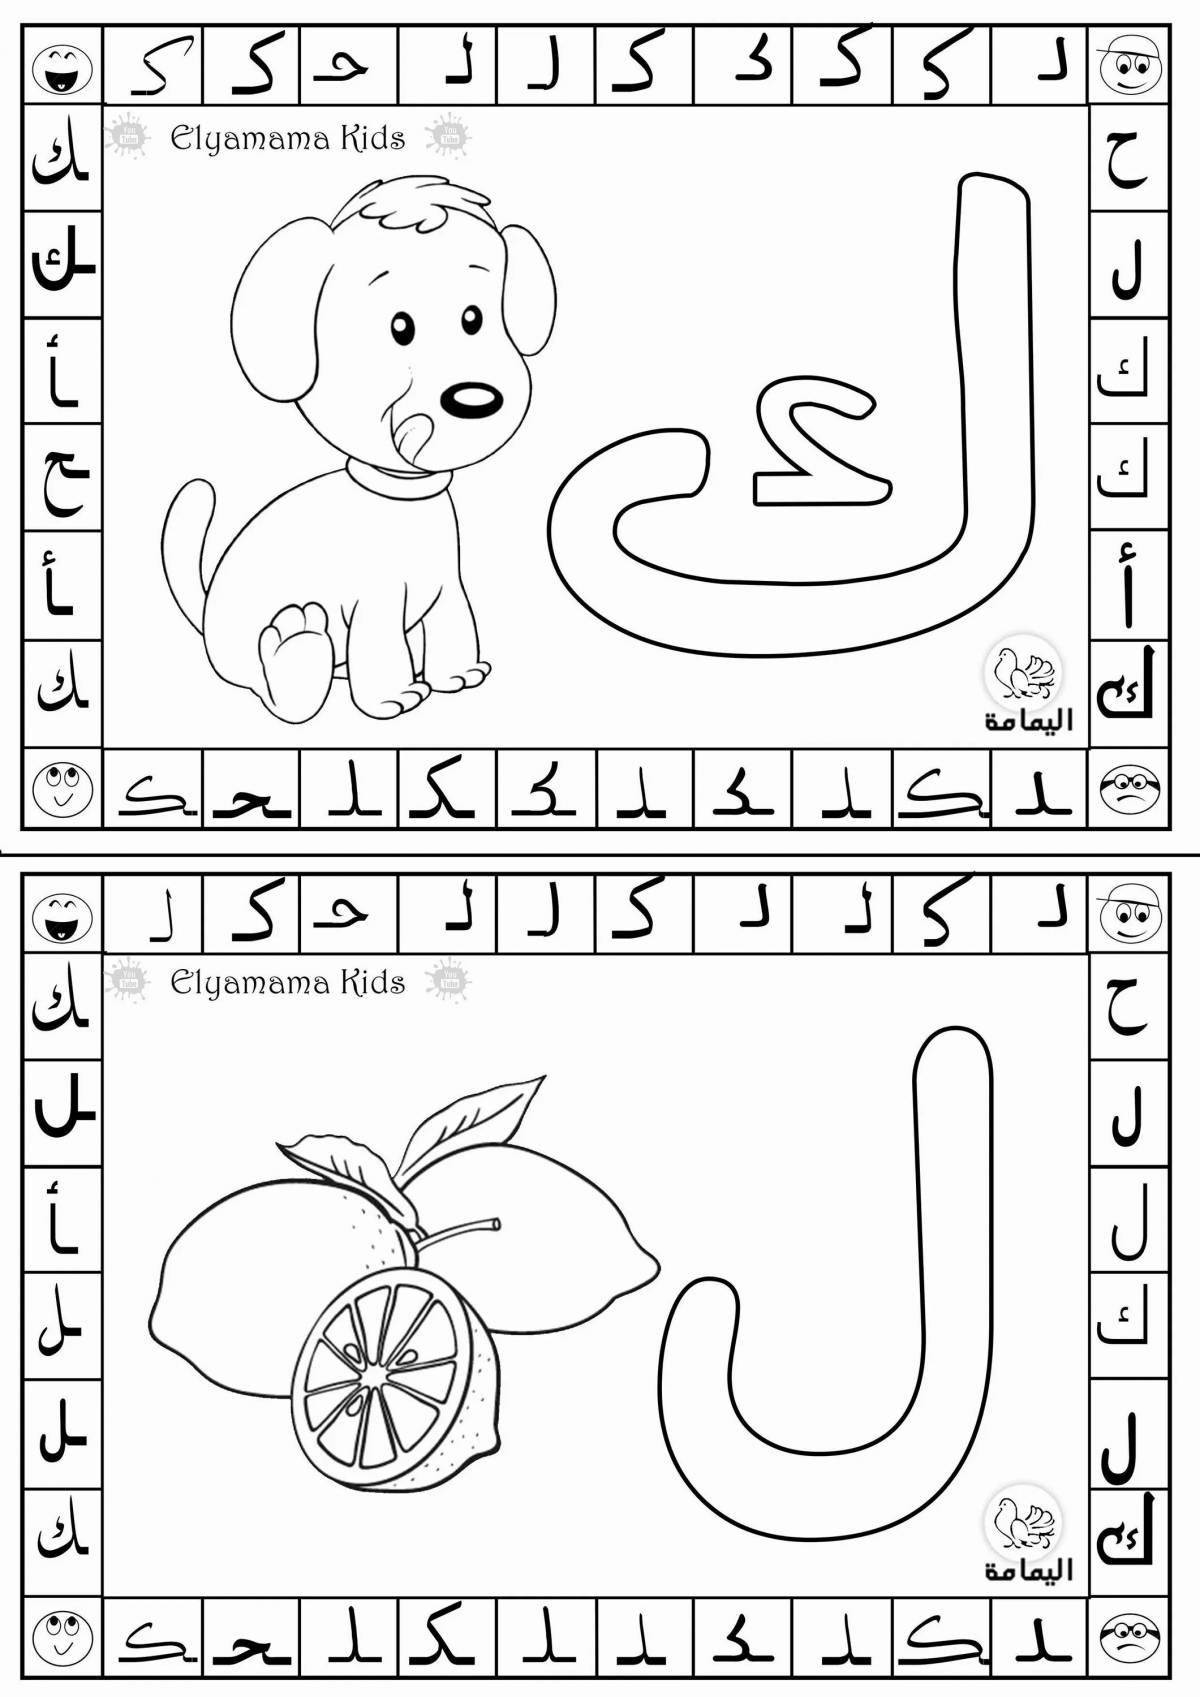 An entertaining Arabic alphabet coloring book for kids